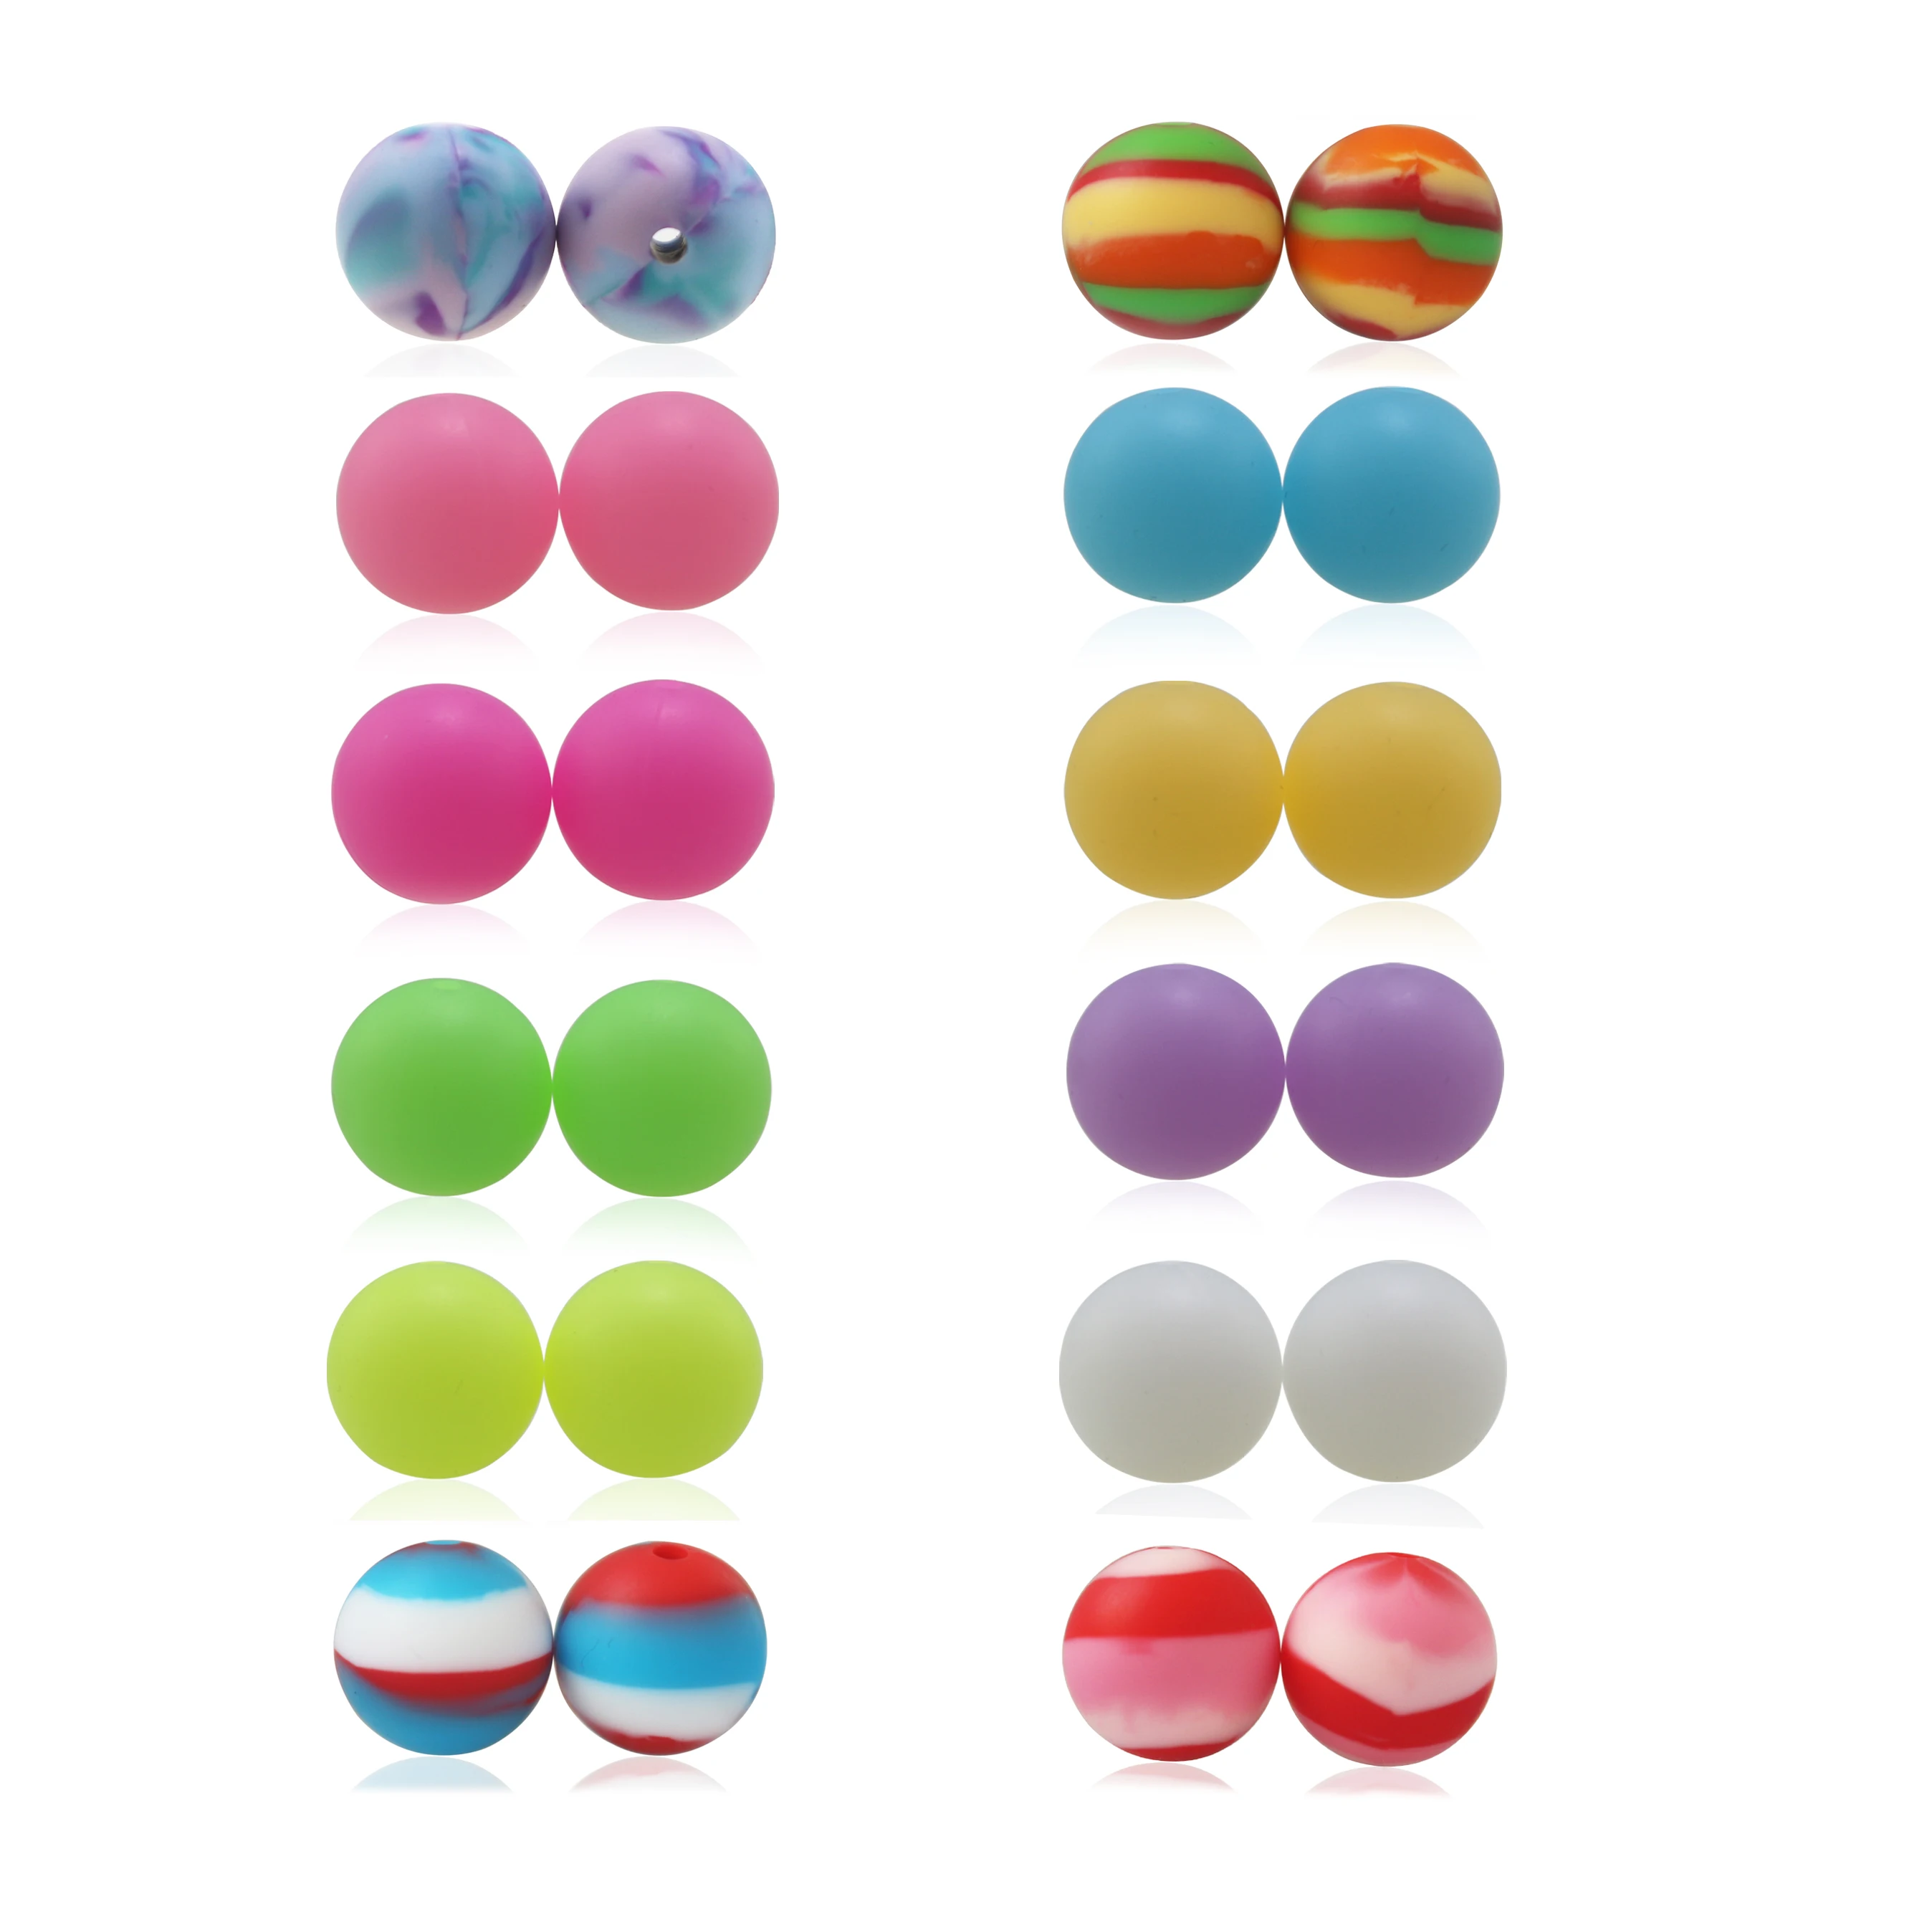 

Wholesale High Quality 10MM/12MM/15MM Round Glow In The Dark Custom Teether Baby Teething Beads Soft Food Grade Silicone Beads